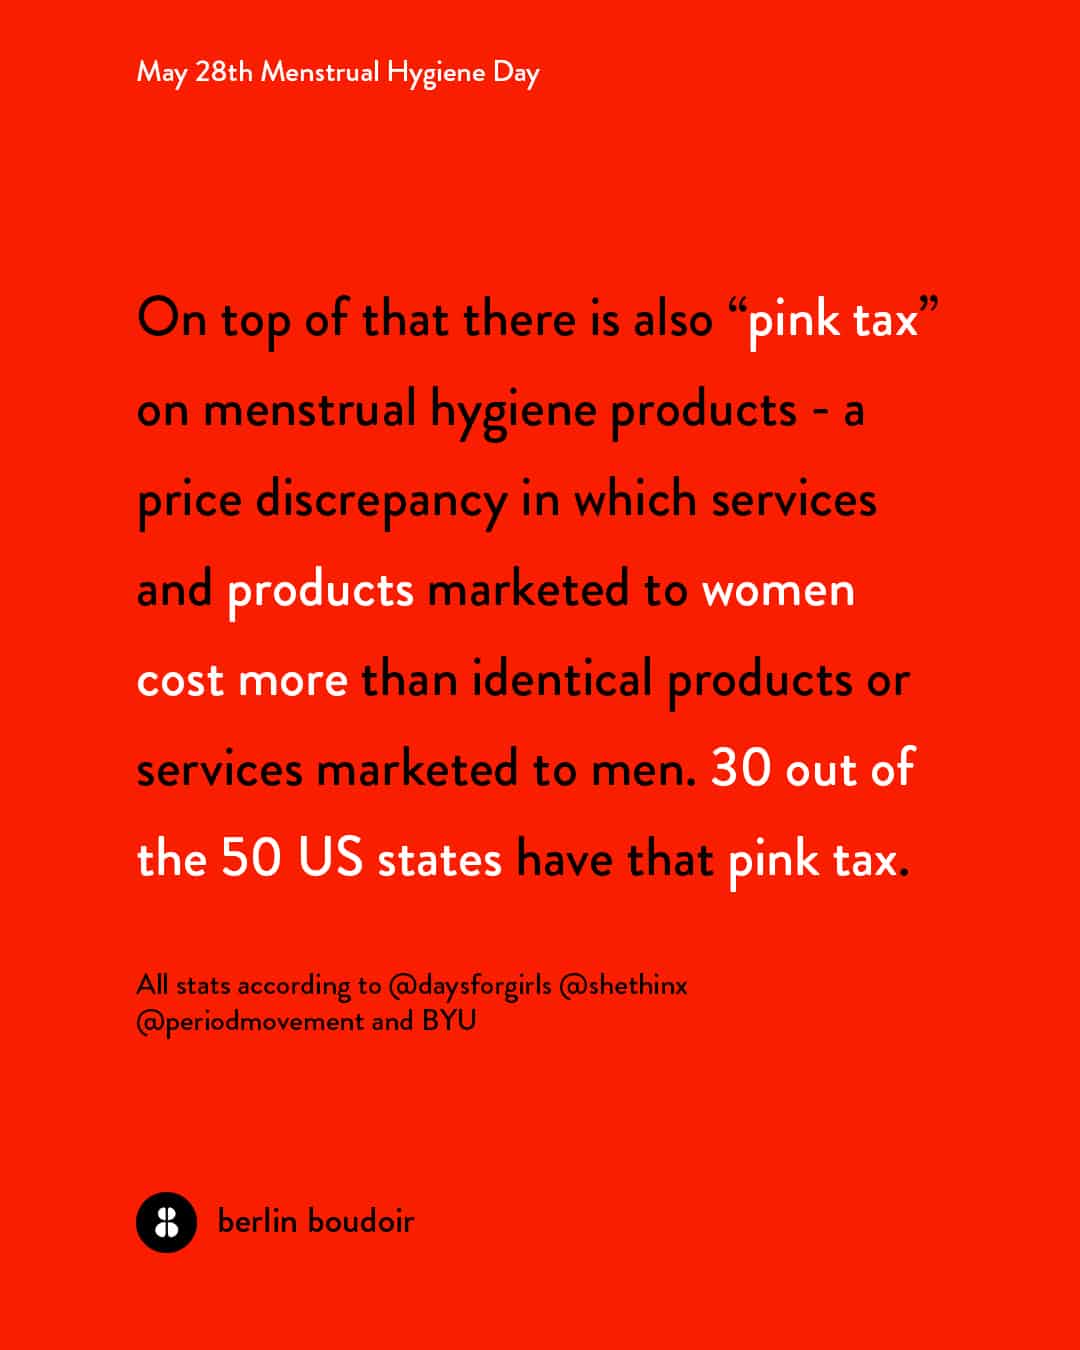 On top of that there is also “pink tax” on menstrual hygiene products - a price discrepancy in which services and products marketed to women cost more than identical products or services marketed to men. 30 out of the 50 US states have that pink tax.